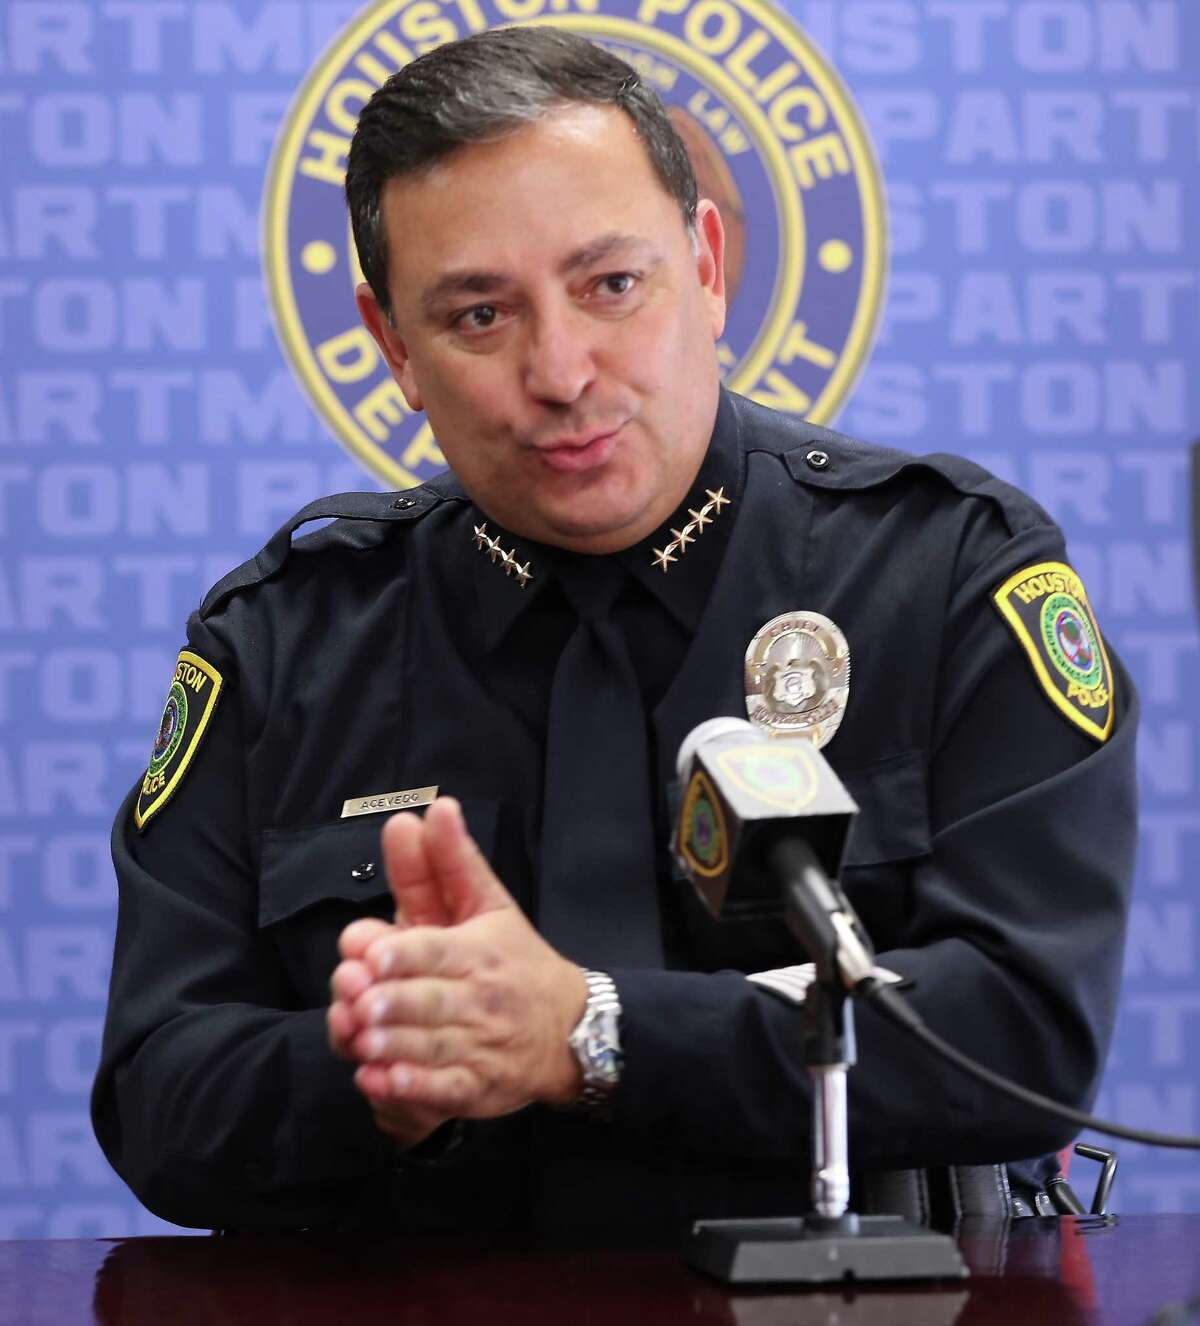 Houston Police Chief Art Acevedo met with the media to discuss the issue of Houston gangs and recent comments by Governor Abbott concerning them Wednesday, Jan. 9, 2019, in Houston.